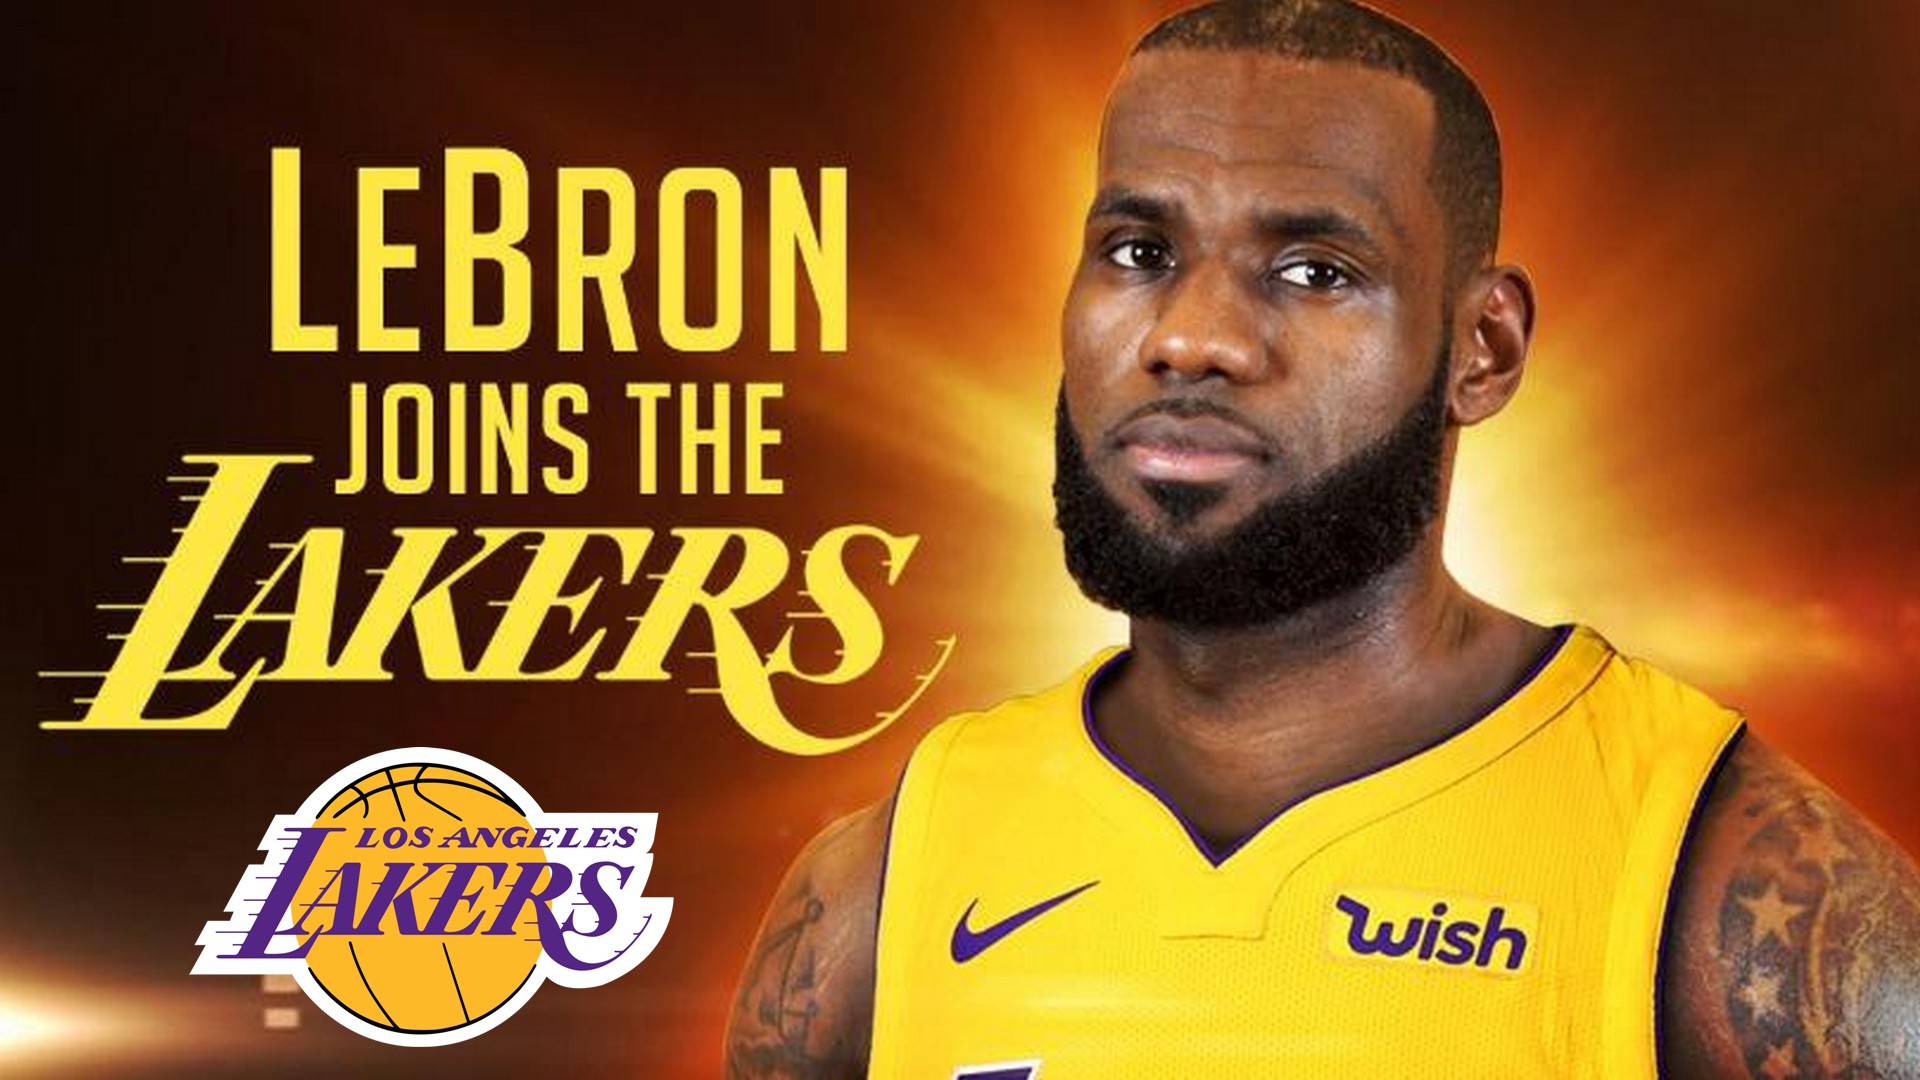 LeBron James Lakers Jersey HD Wallpapers with image dimensions 1920x1080 pixel. You can make this wallpaper for your Desktop Computer Backgrounds, Windows or Mac Screensavers, iPhone Lock screen, Tablet or Android and another Mobile Phone device